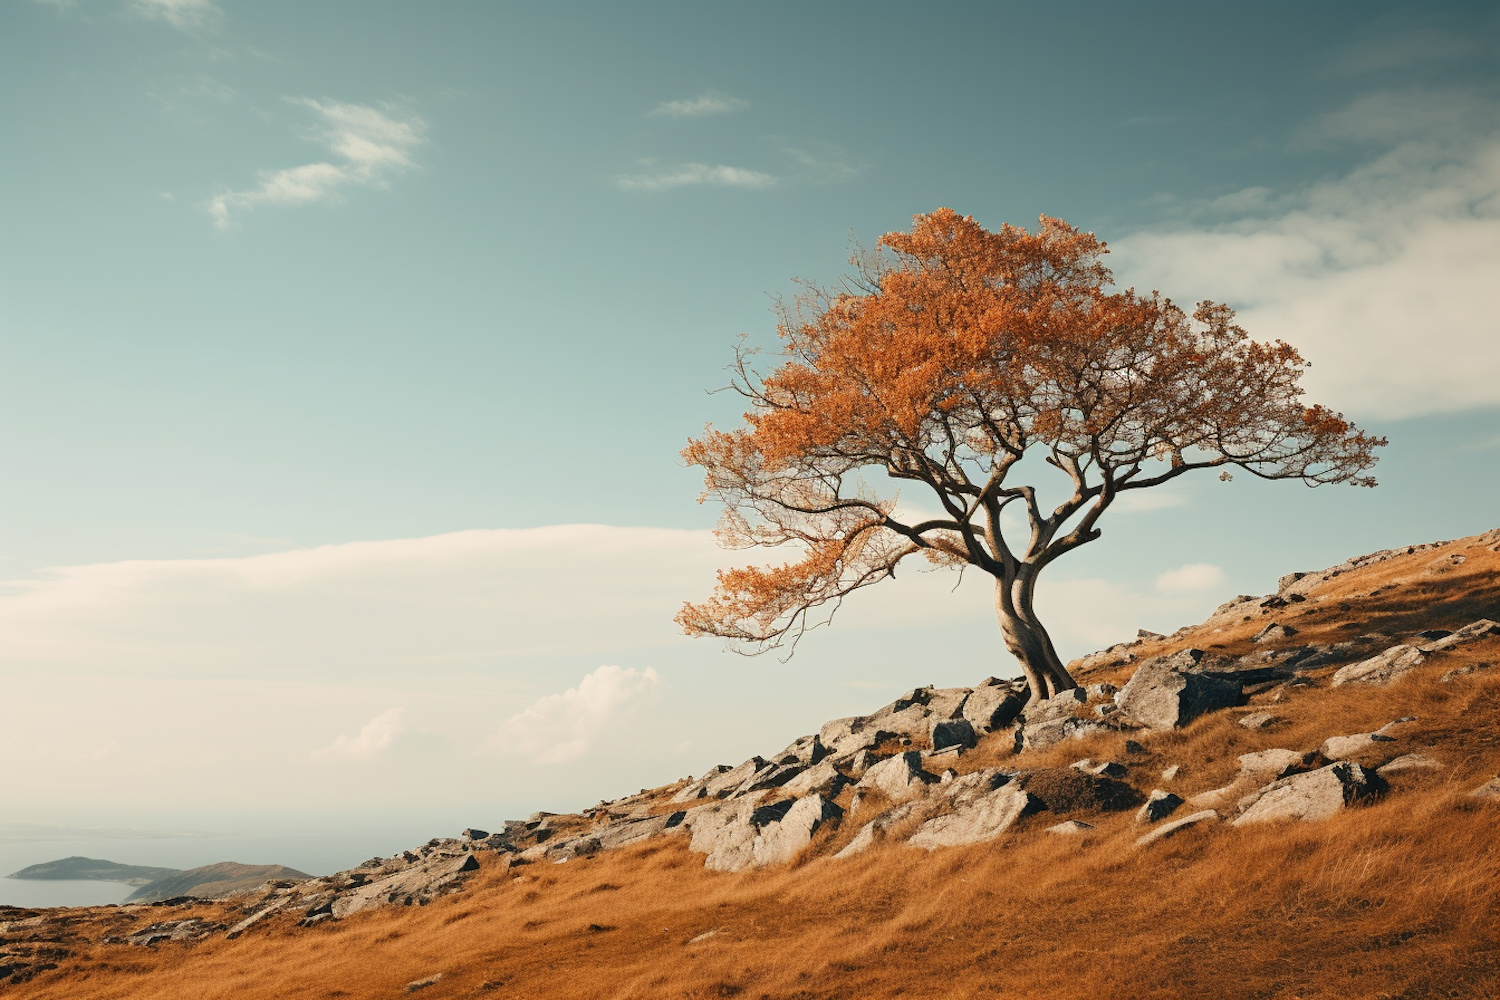 Autumn Resilience: The Lone Tree's Embrace